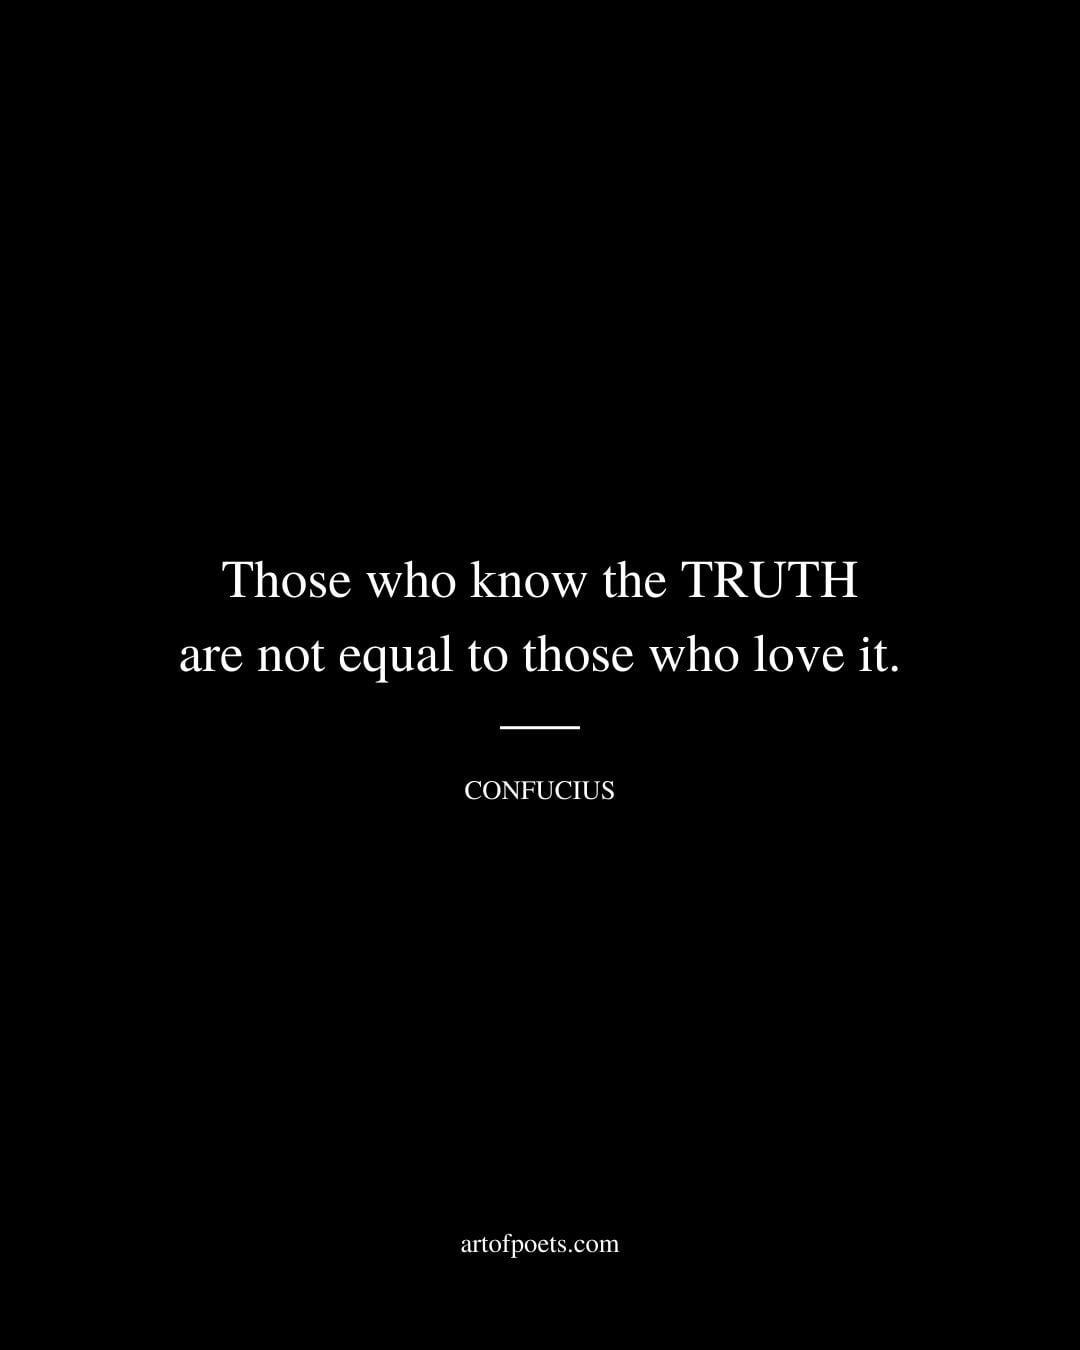 Those who know the TRUTH are not equal to those who love it